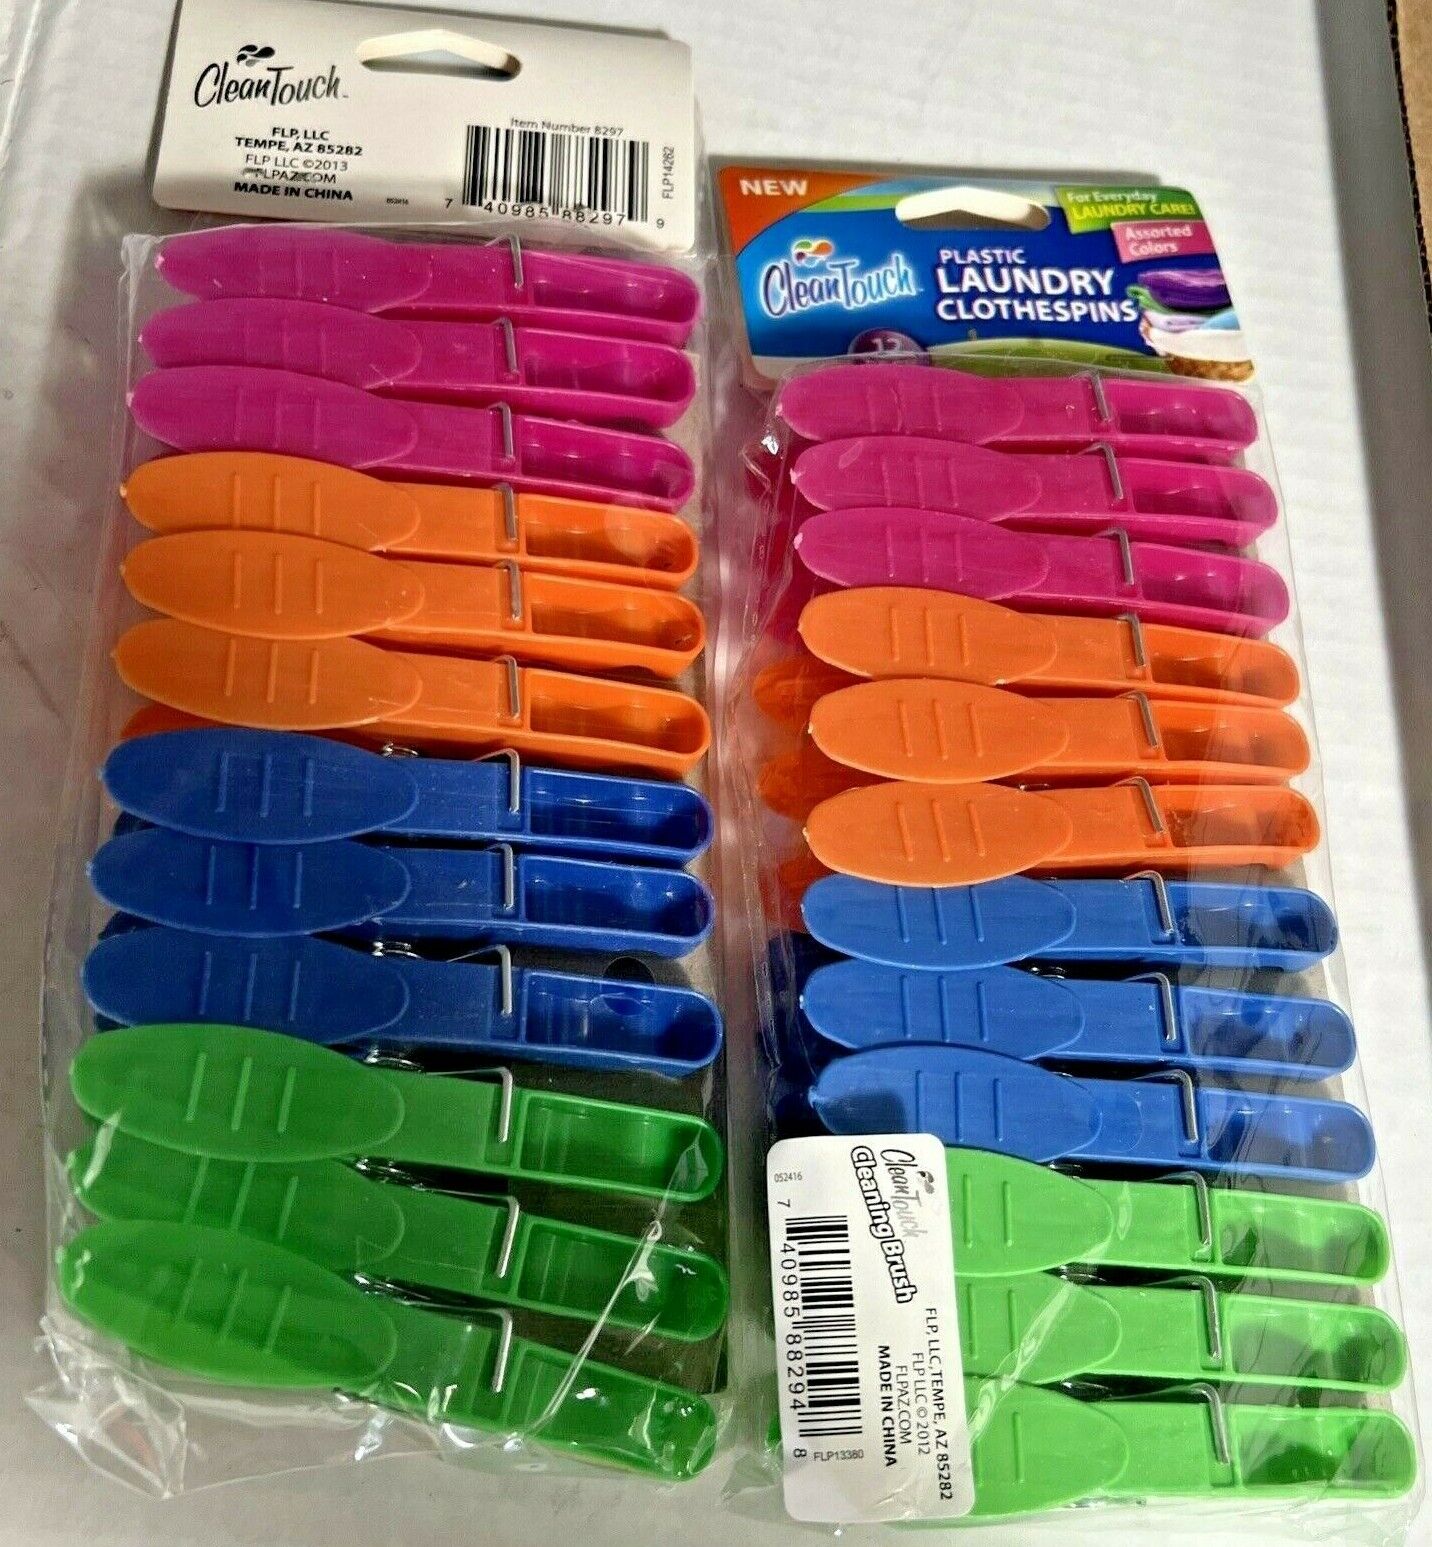 Clean Touch Plastic Laundry Color Clothespins 24 Pegs 3 1/4 Inch